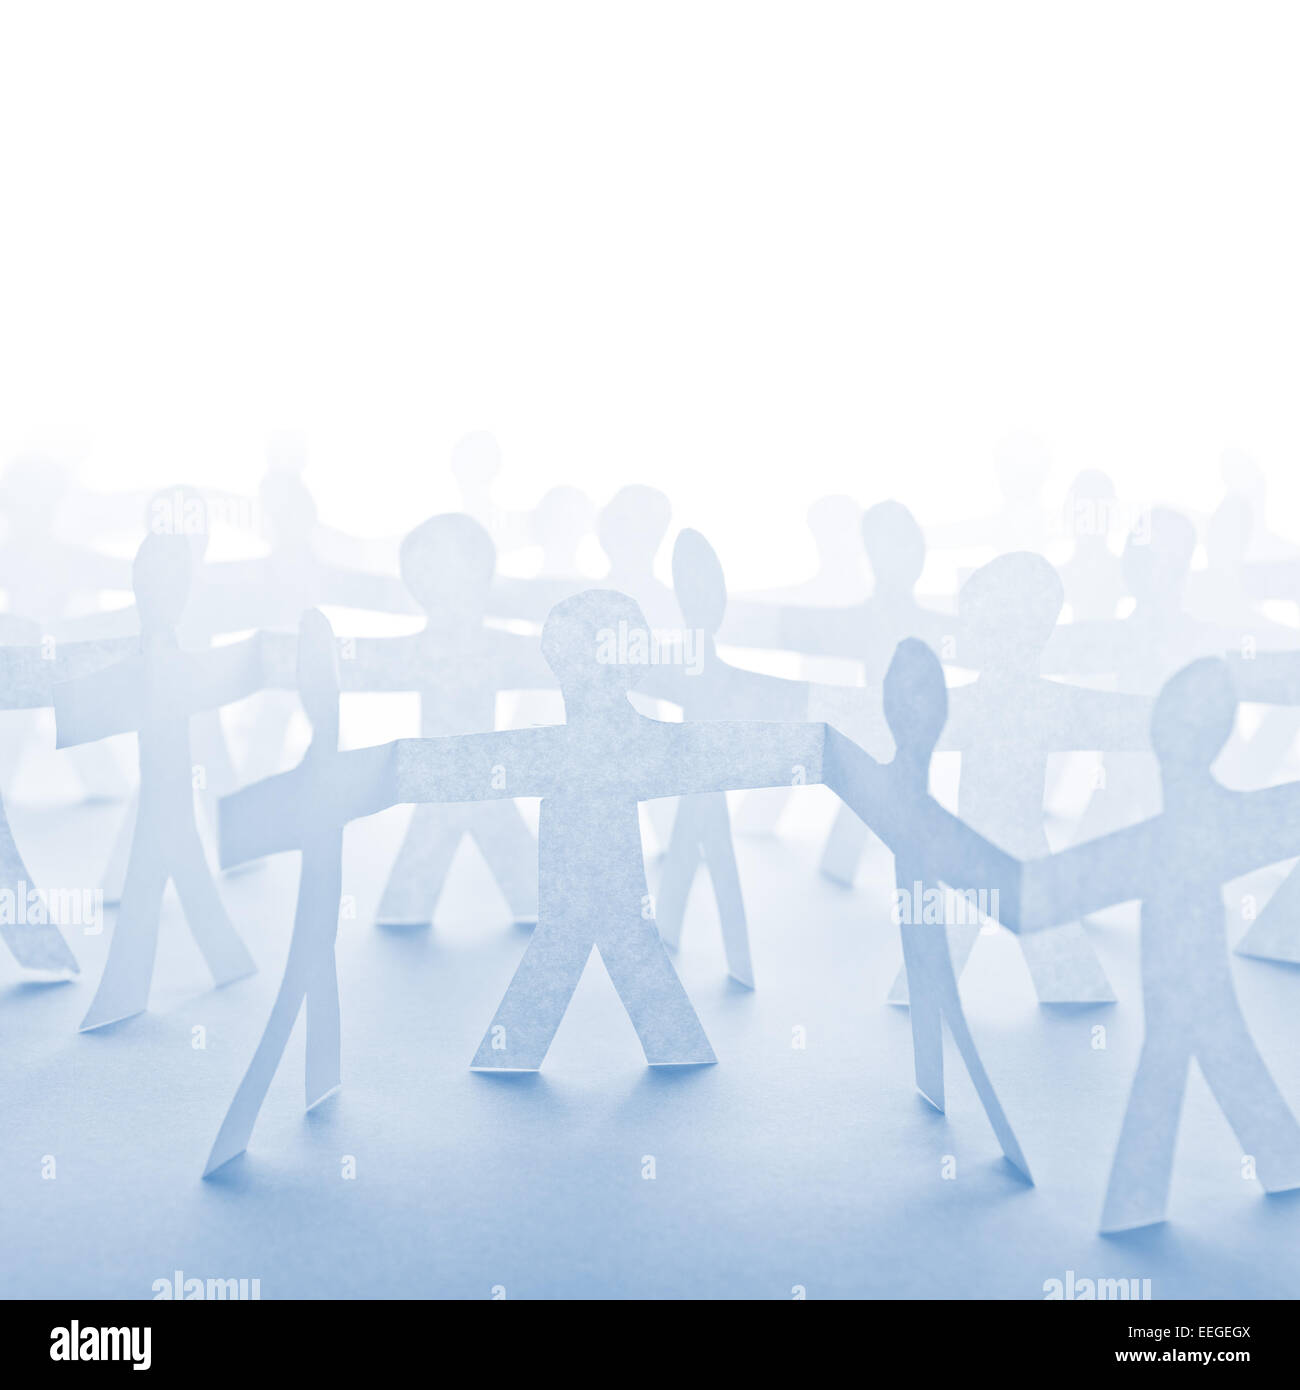 People Paper Cut Chain as Crowd or Teamwork Abstract Concept with White Copy Space Stock Photo